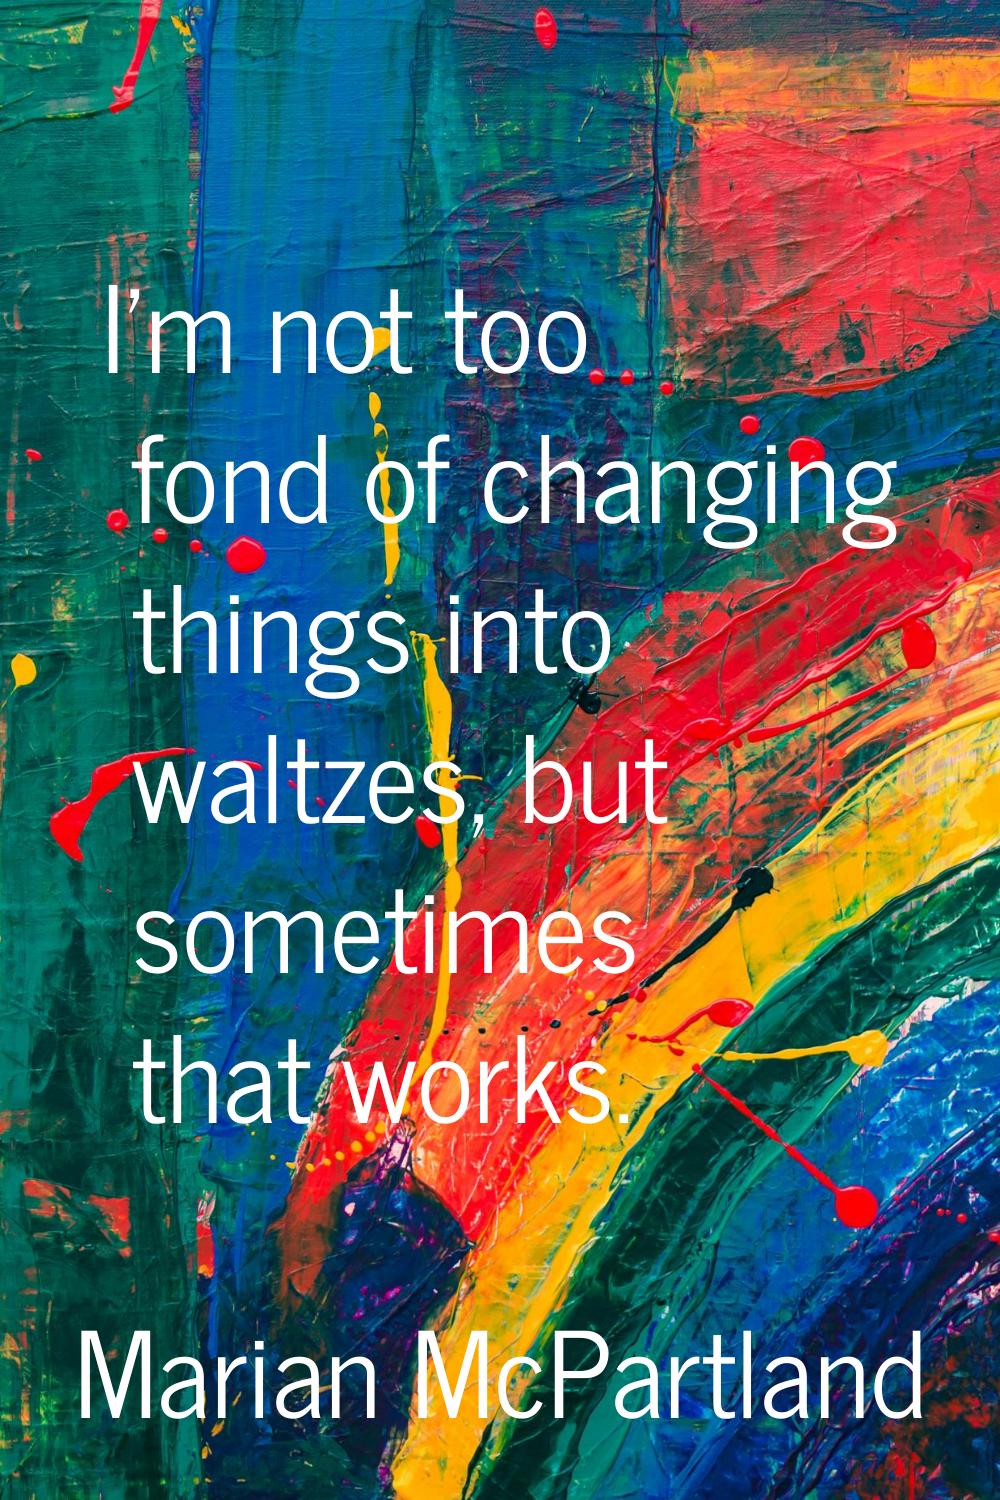 I'm not too fond of changing things into waltzes, but sometimes that works.